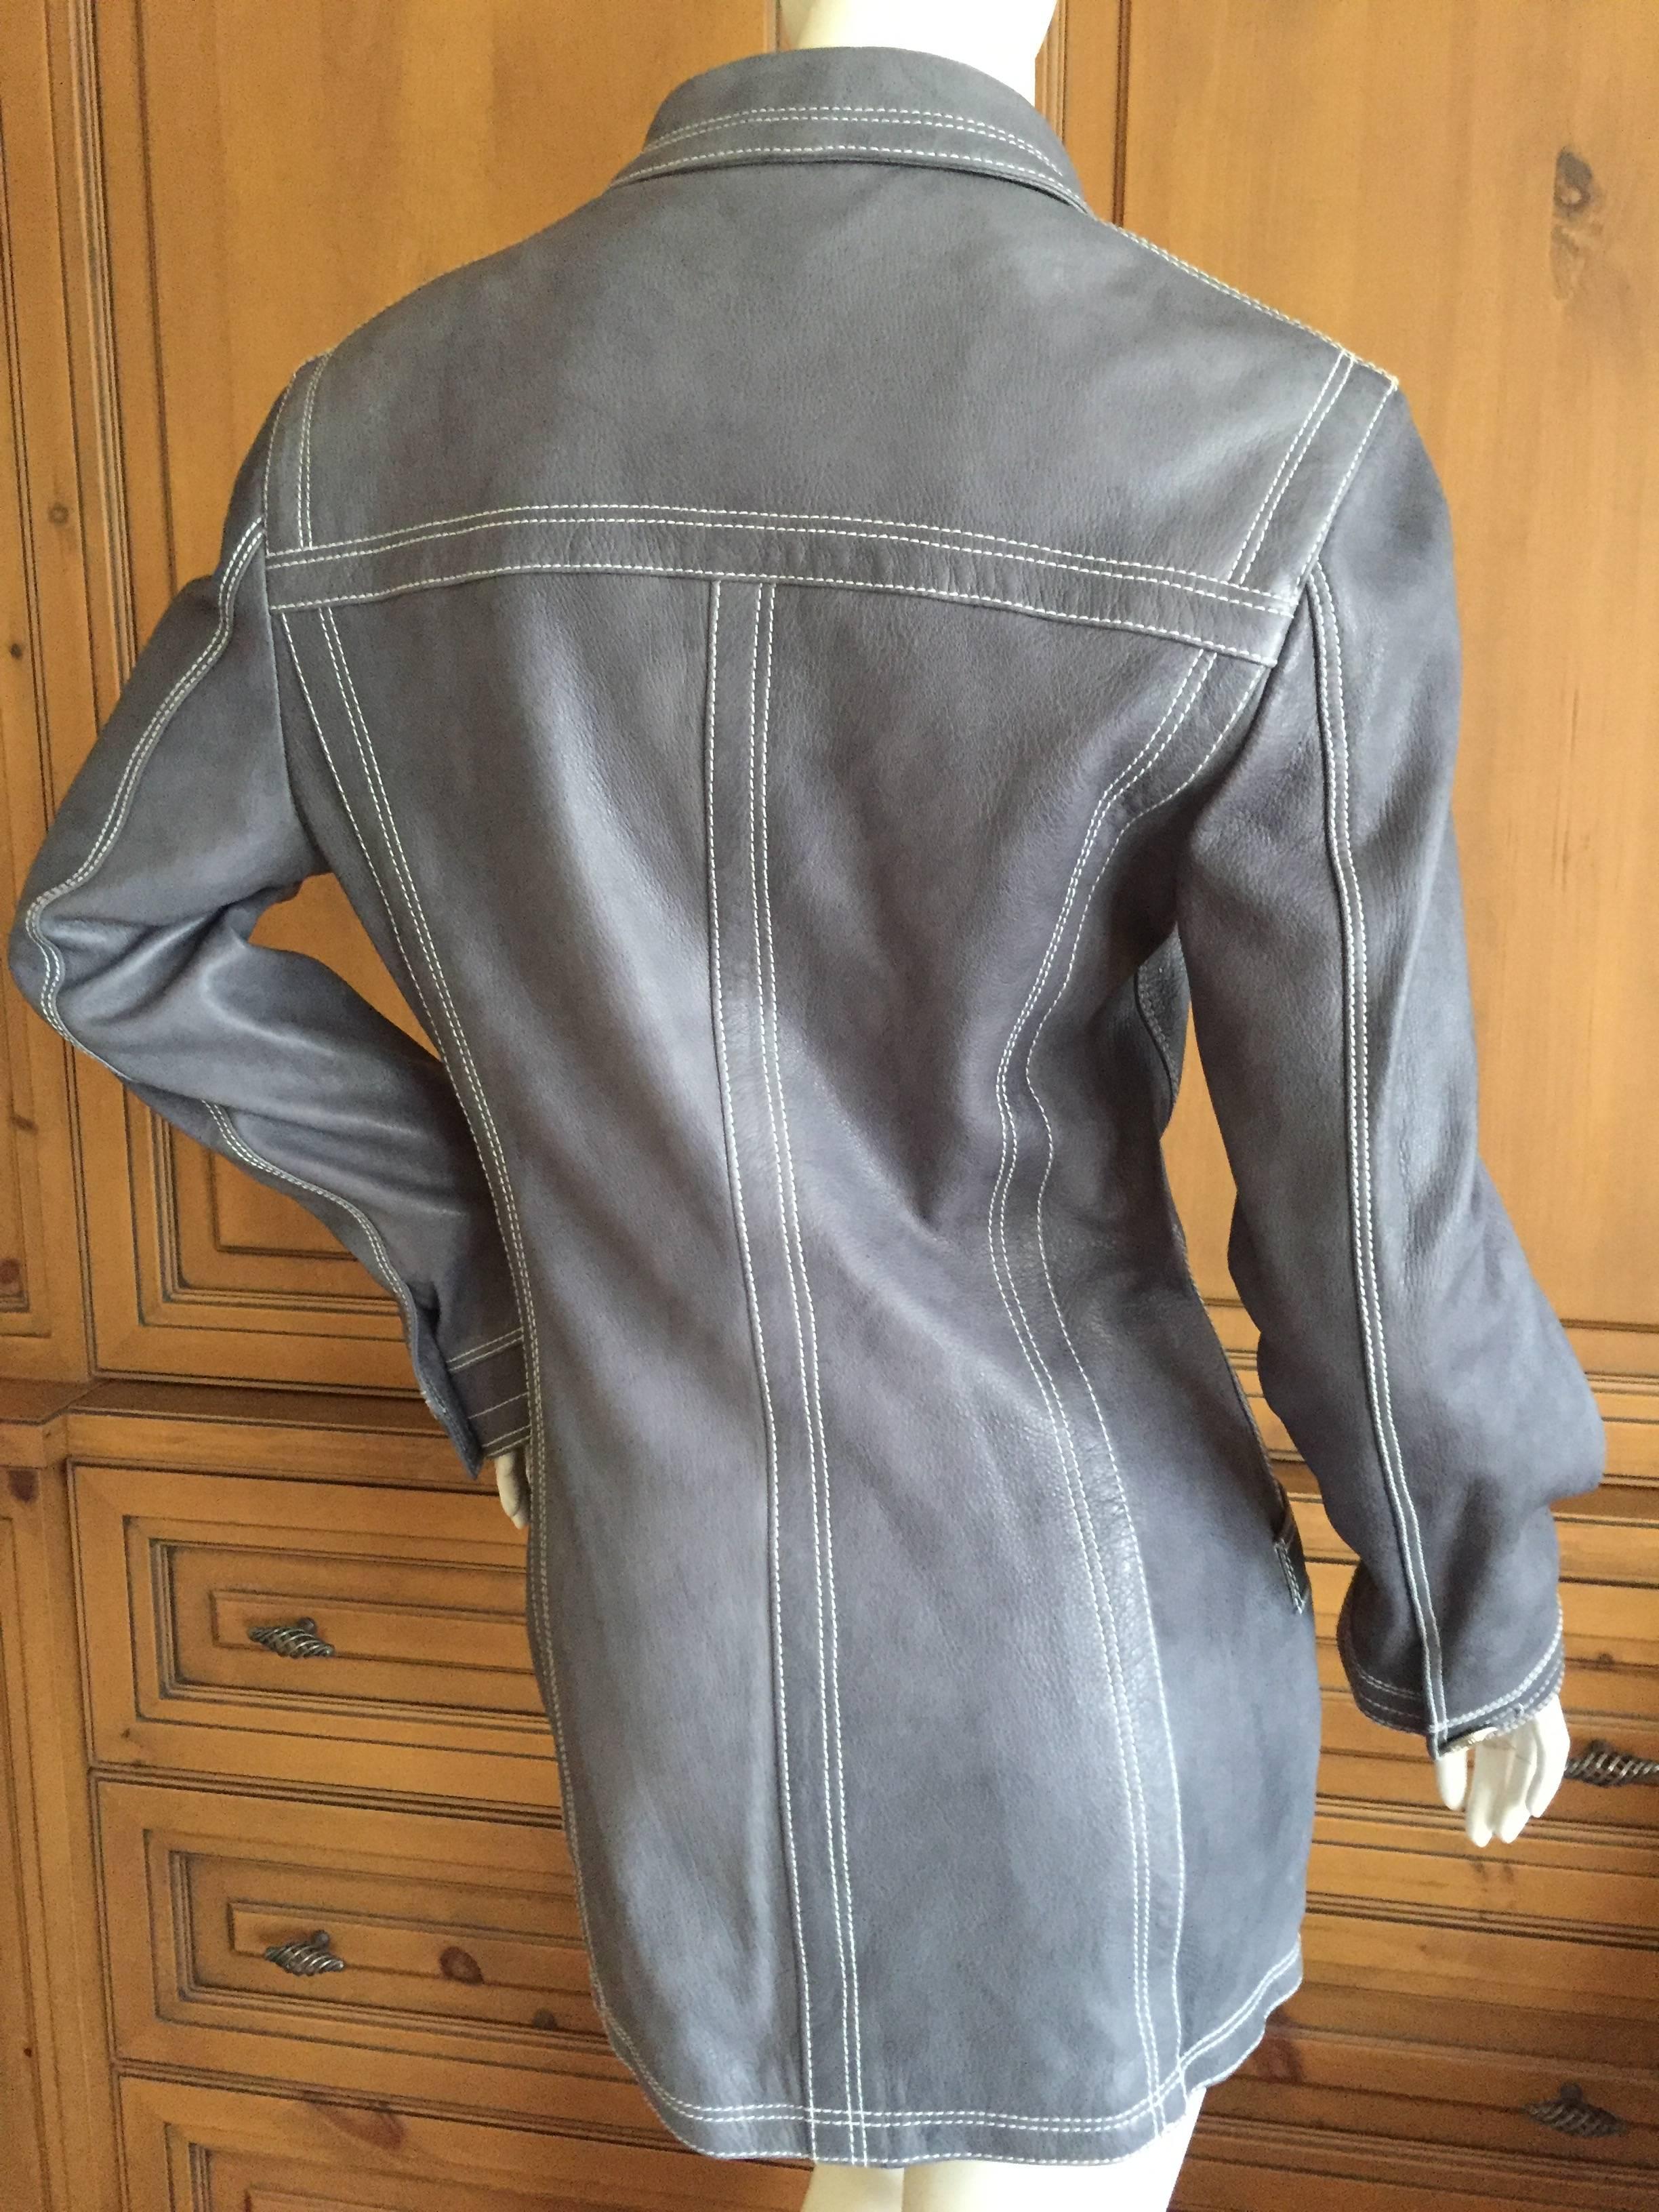 Gianni Versace Vintage 80's Blue Leather Jacket In Excellent Condition For Sale In Cloverdale, CA